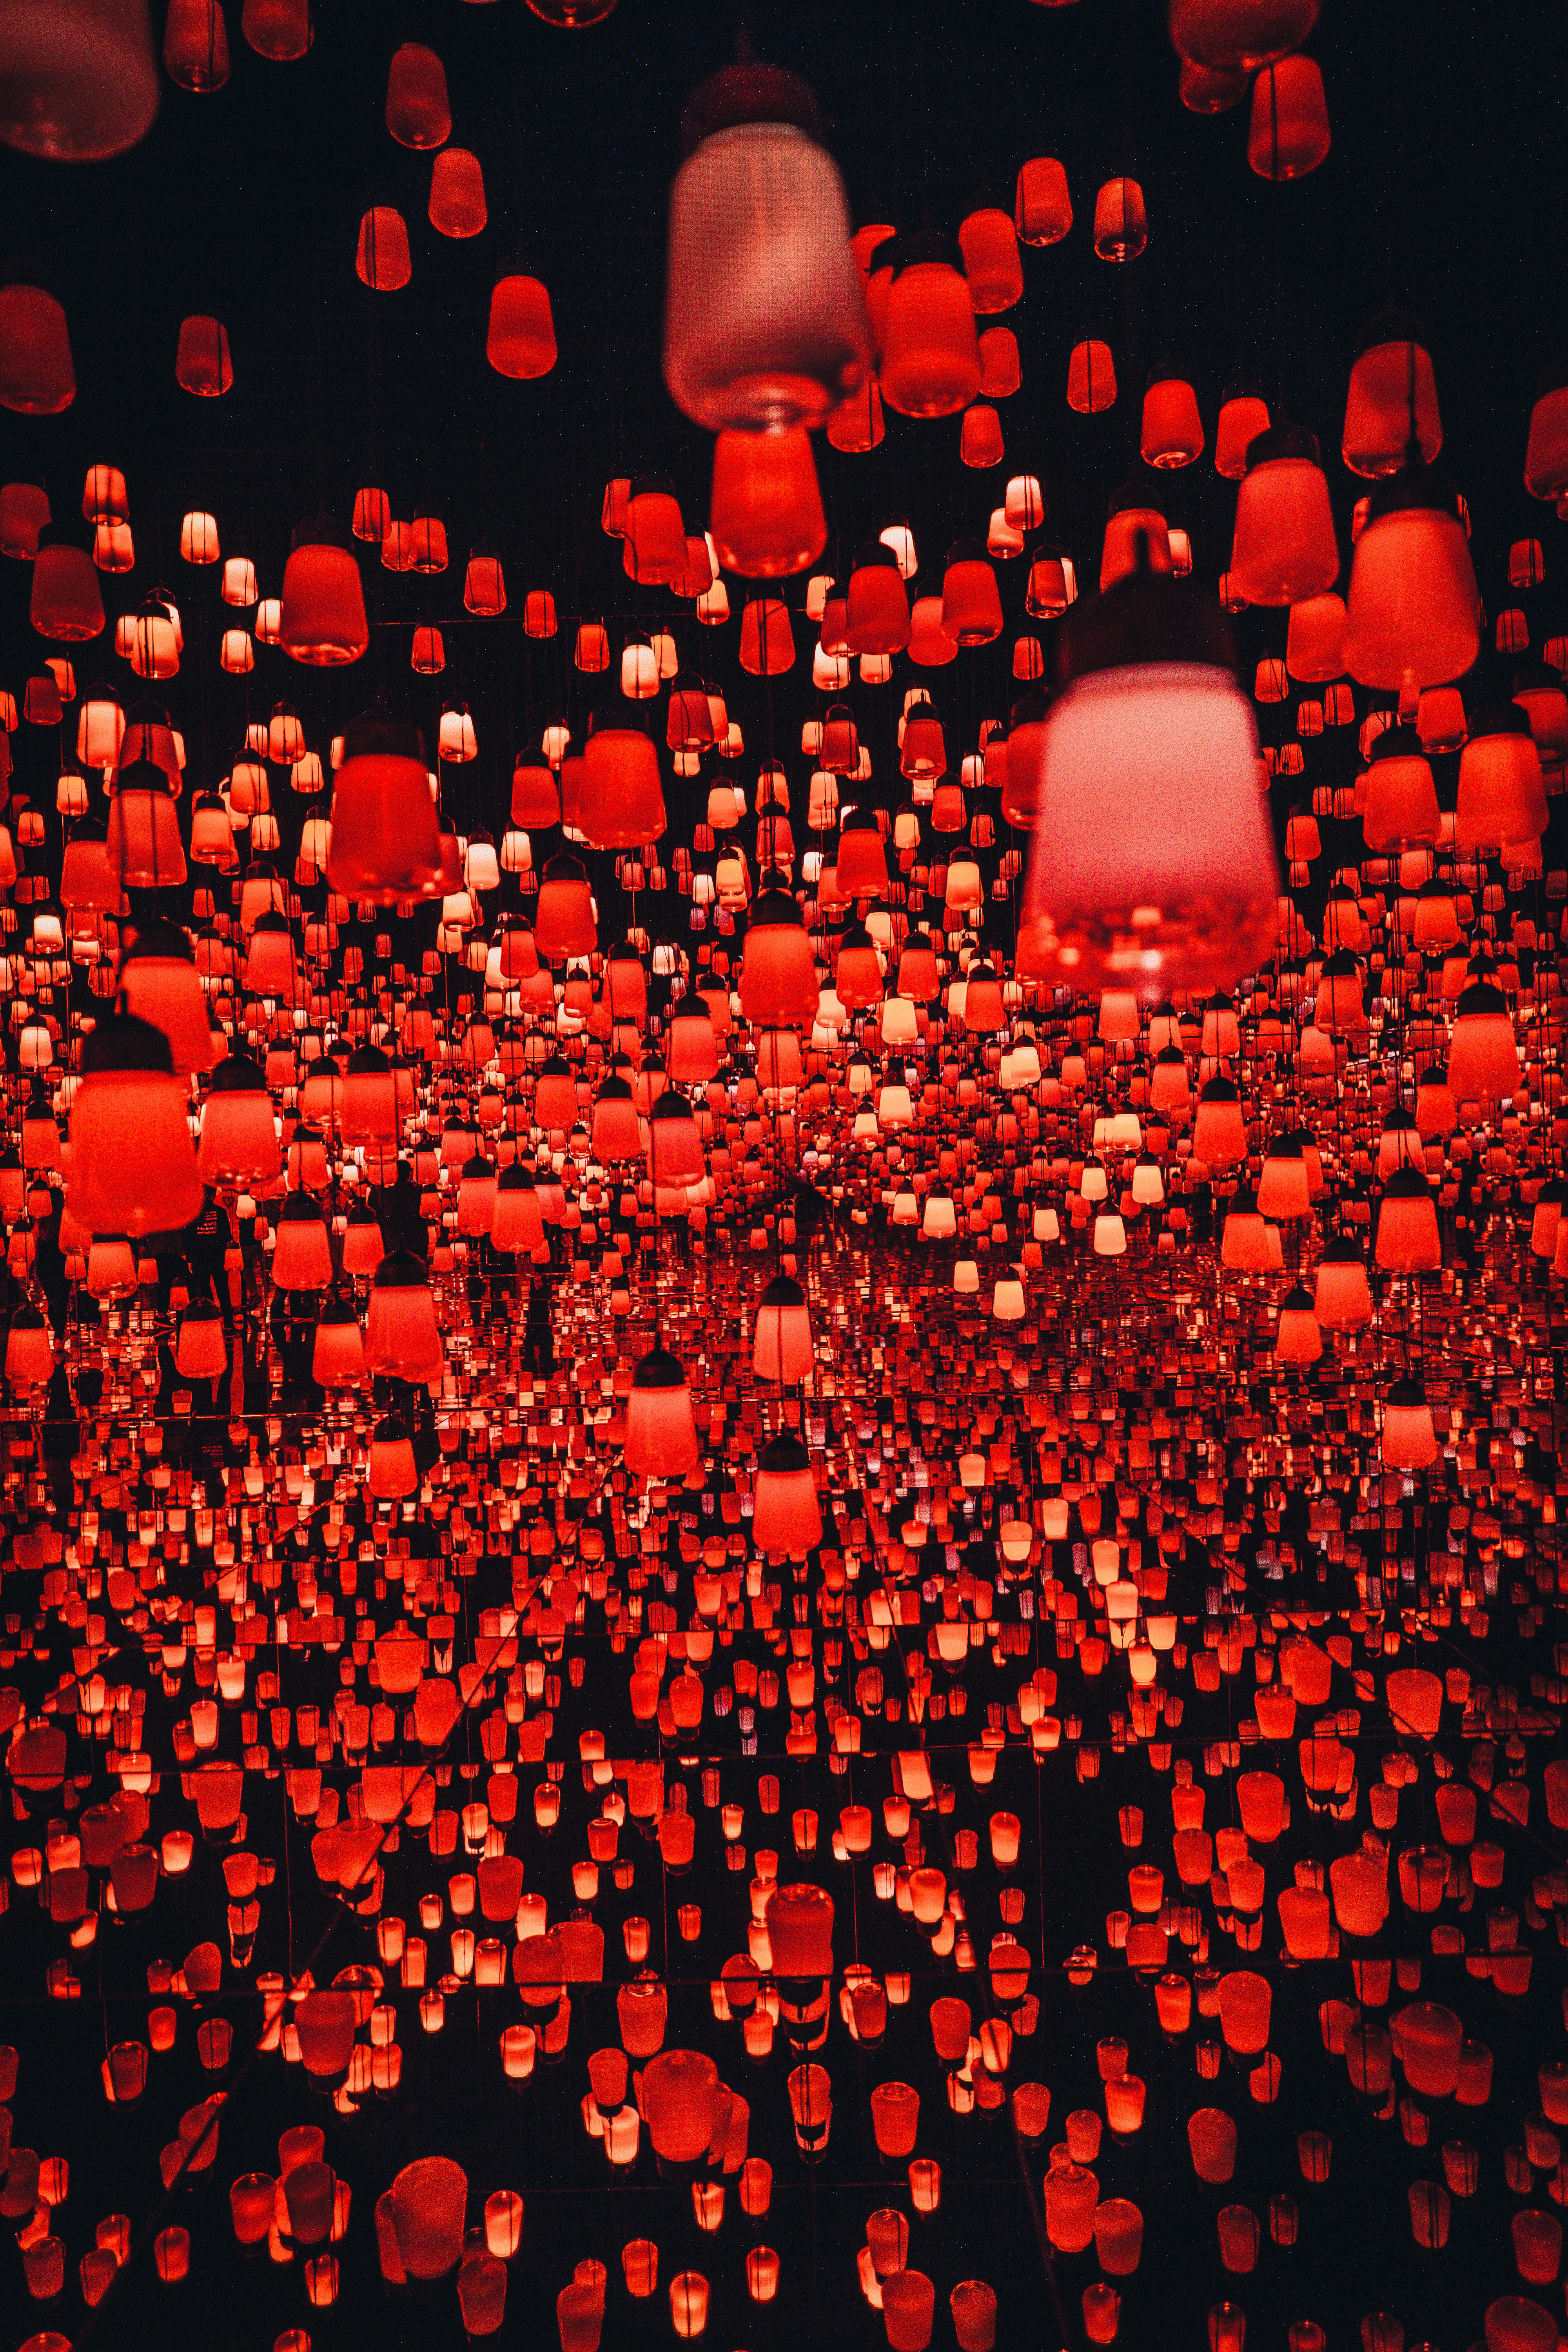 lights, light, red, shine, miscellanea, miscellaneous, lanterns, chinese lanterns cell phone wallpapers